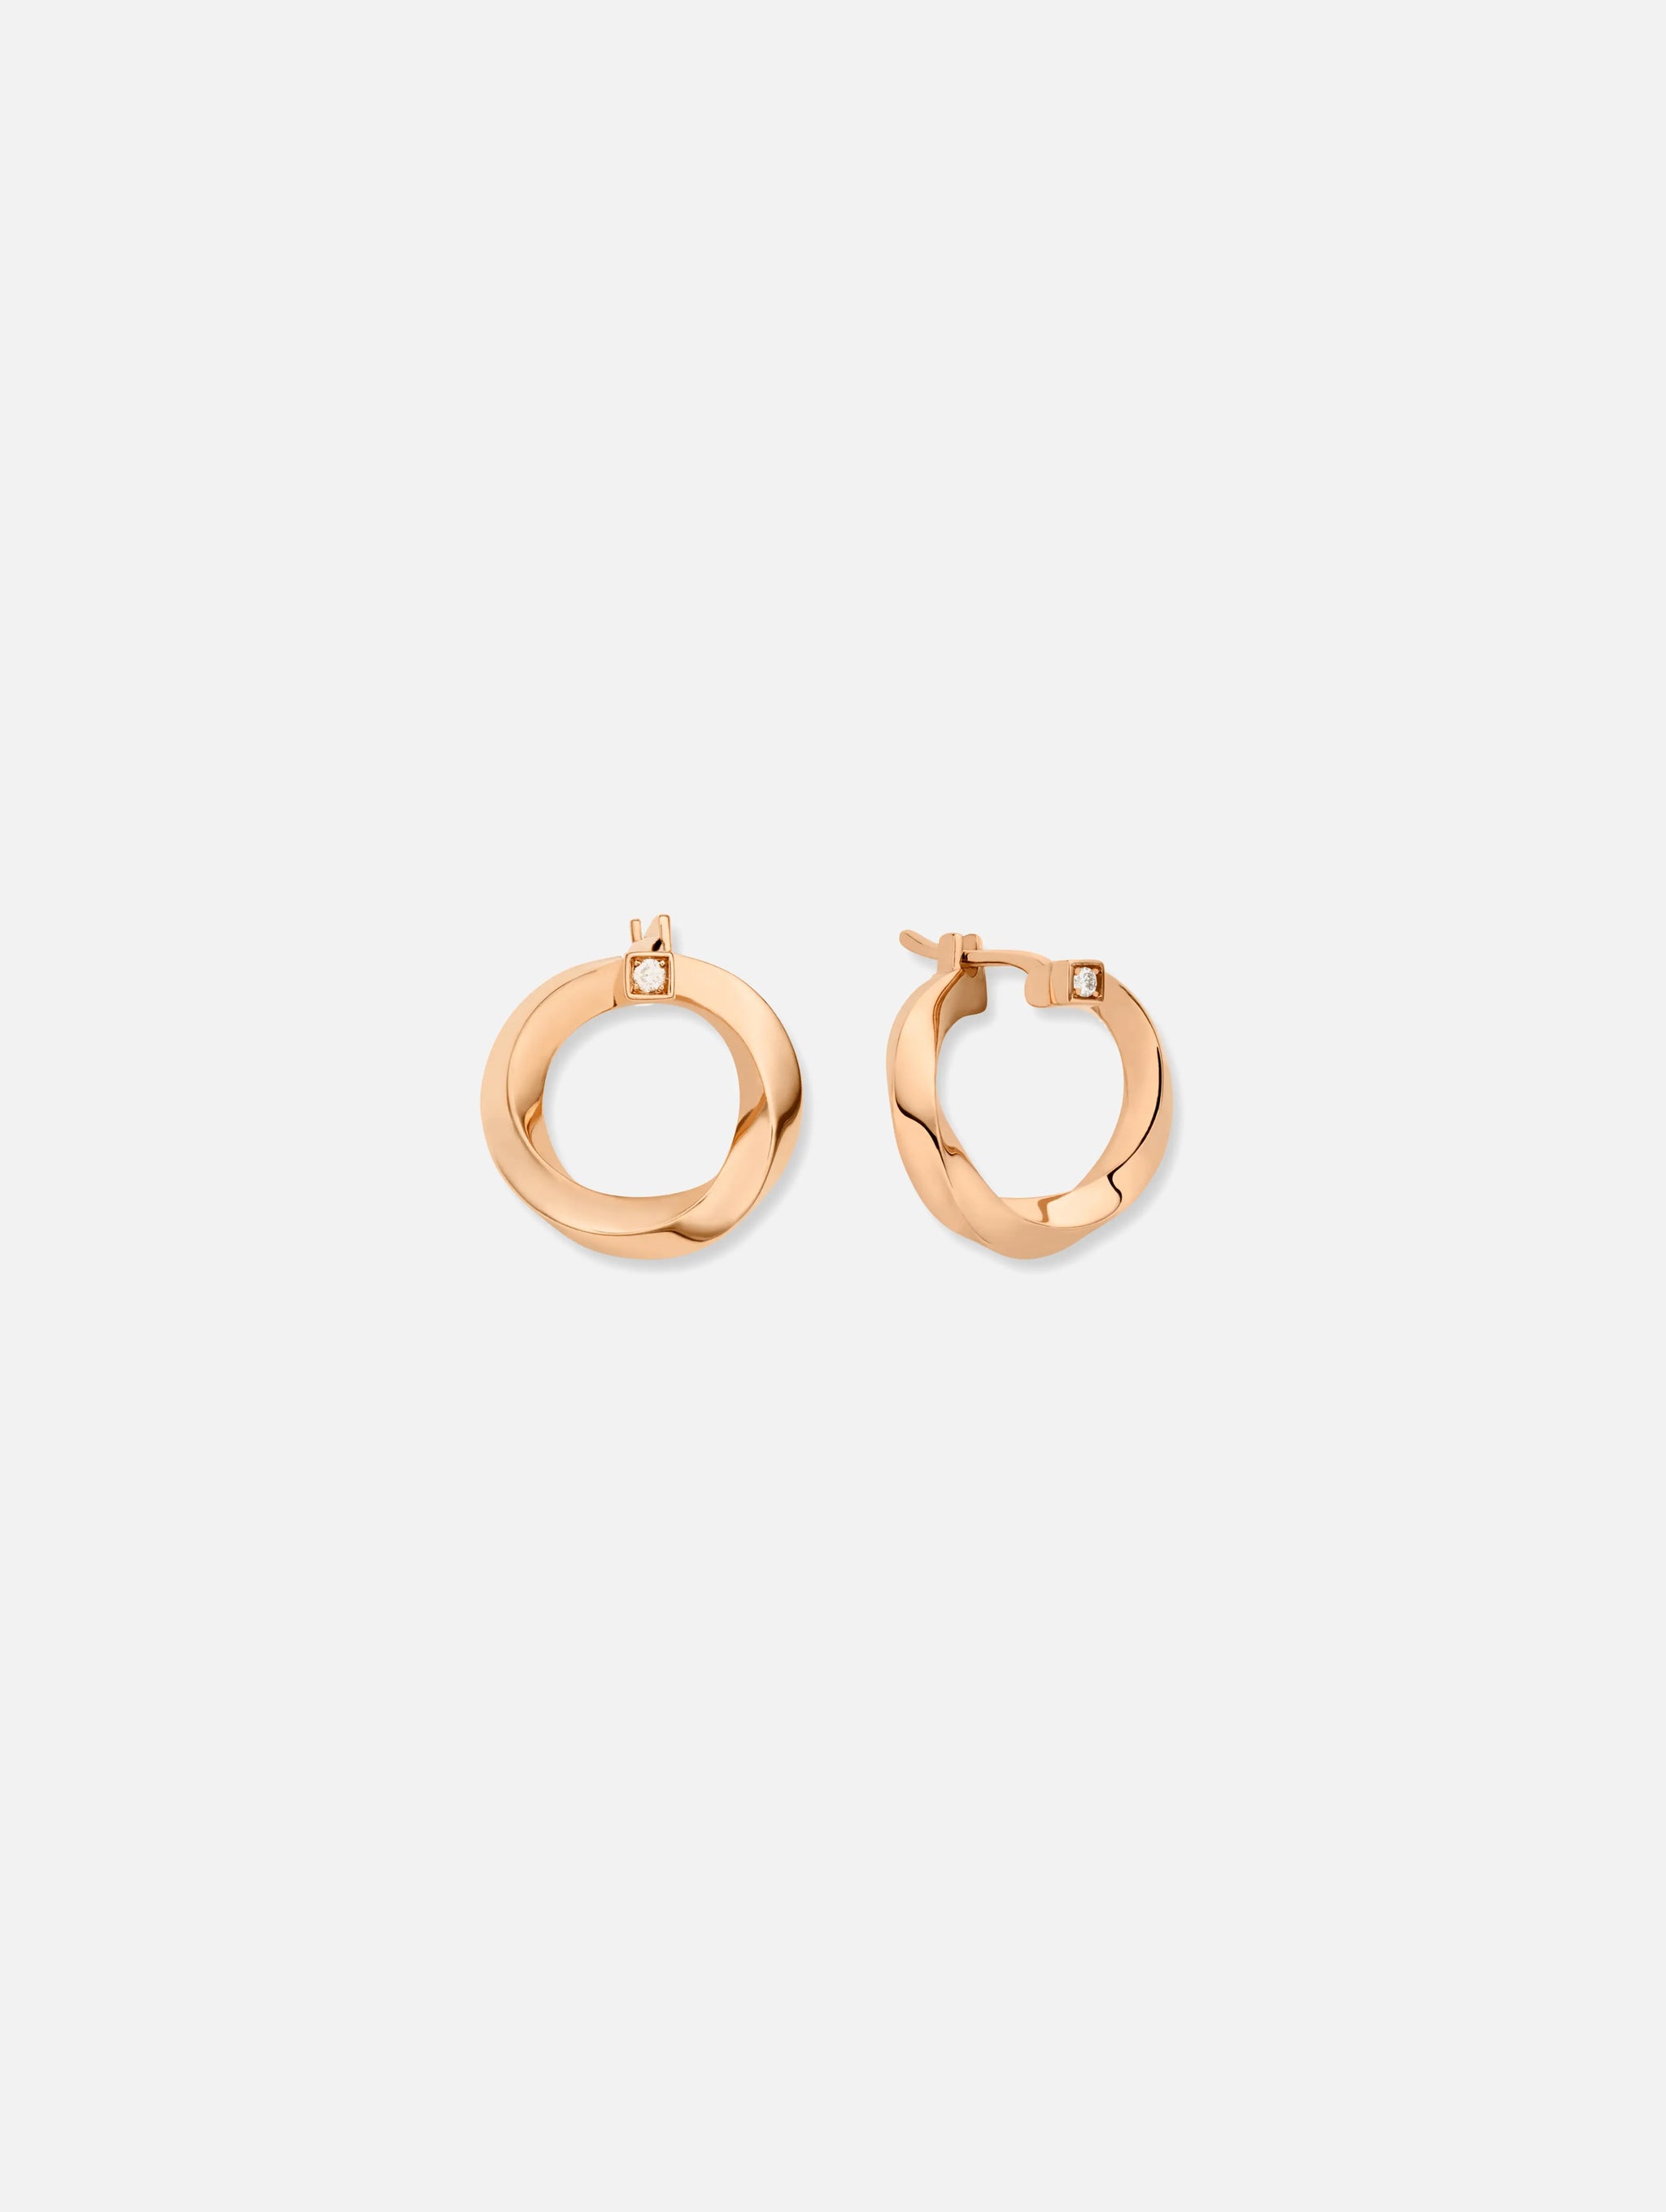 Gold Thread Earrings in Rose Gold - Nouvel Heritage - Nouvel Heritage